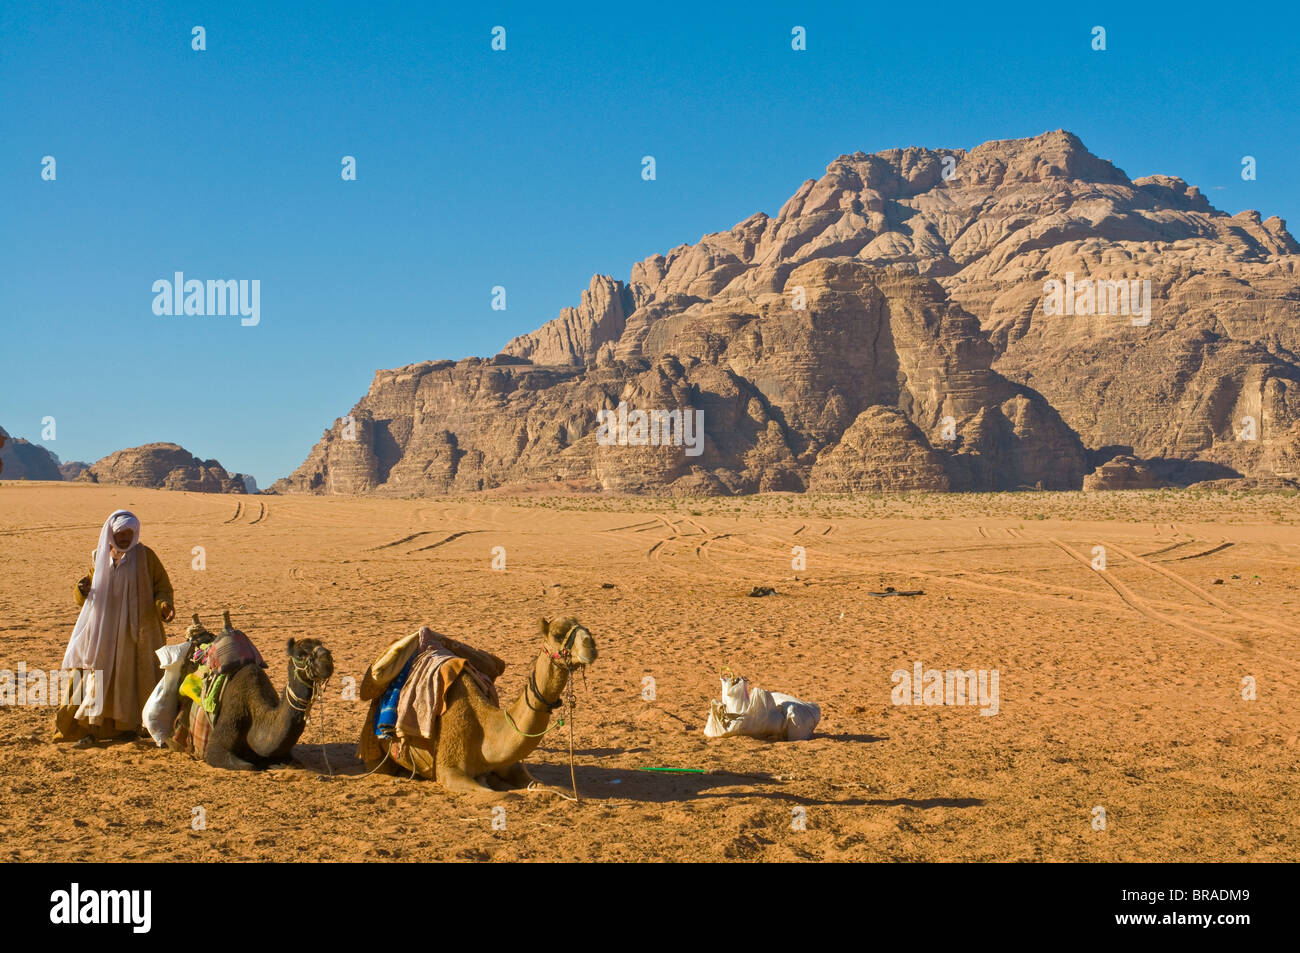 Bedouin with his camels in the stunning scenery of Wadi Rum, Jordan, Middle East Stock Photo